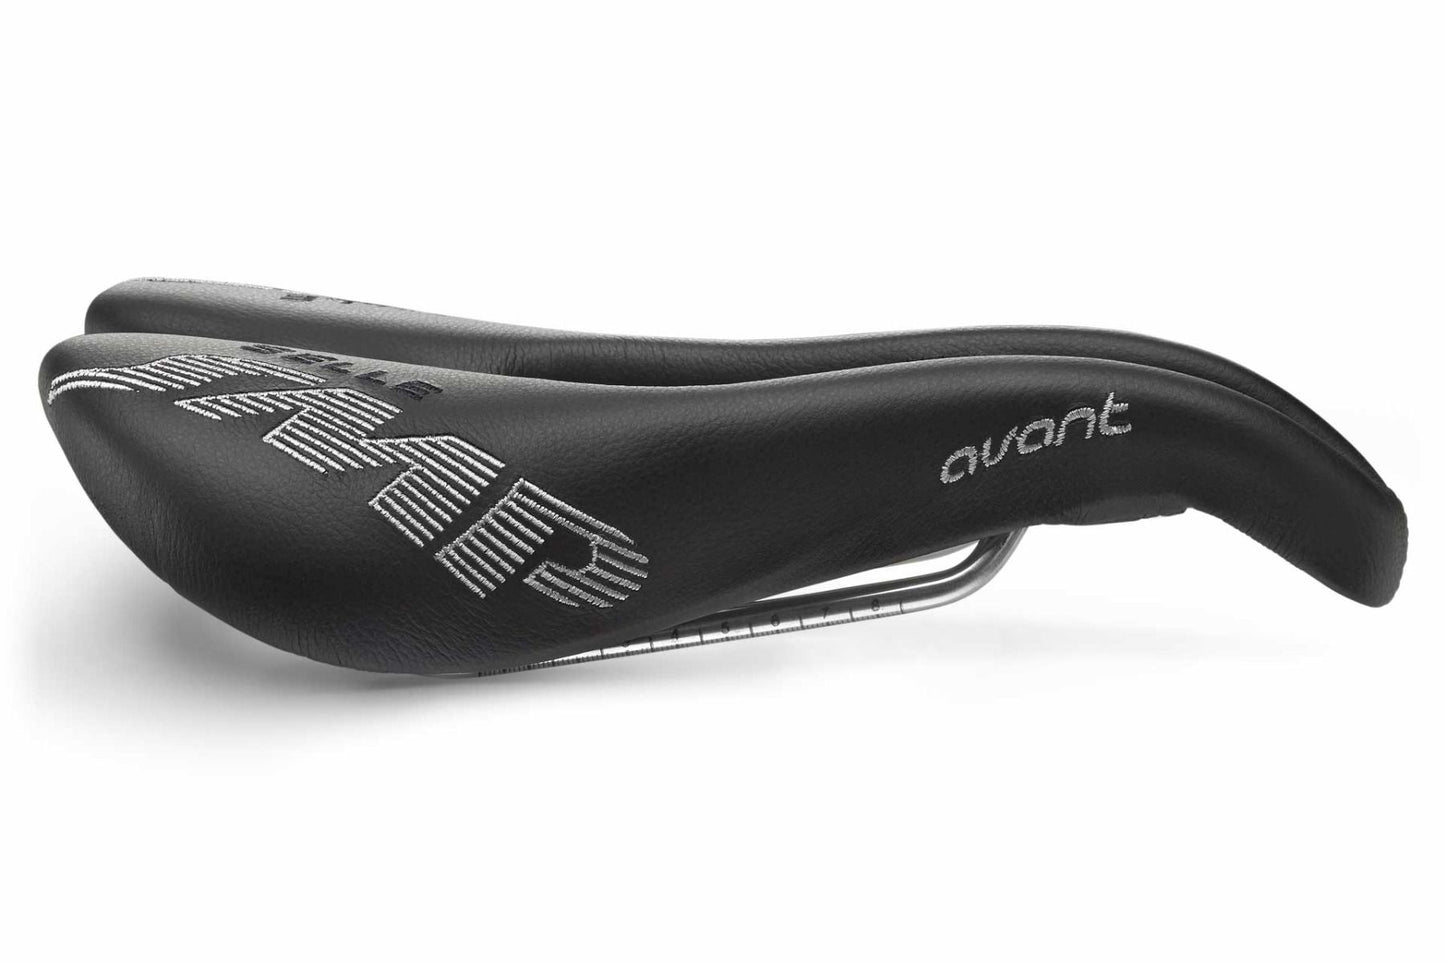 Selle SMP Avant Saddle with Stainless Steel Rails (Black)